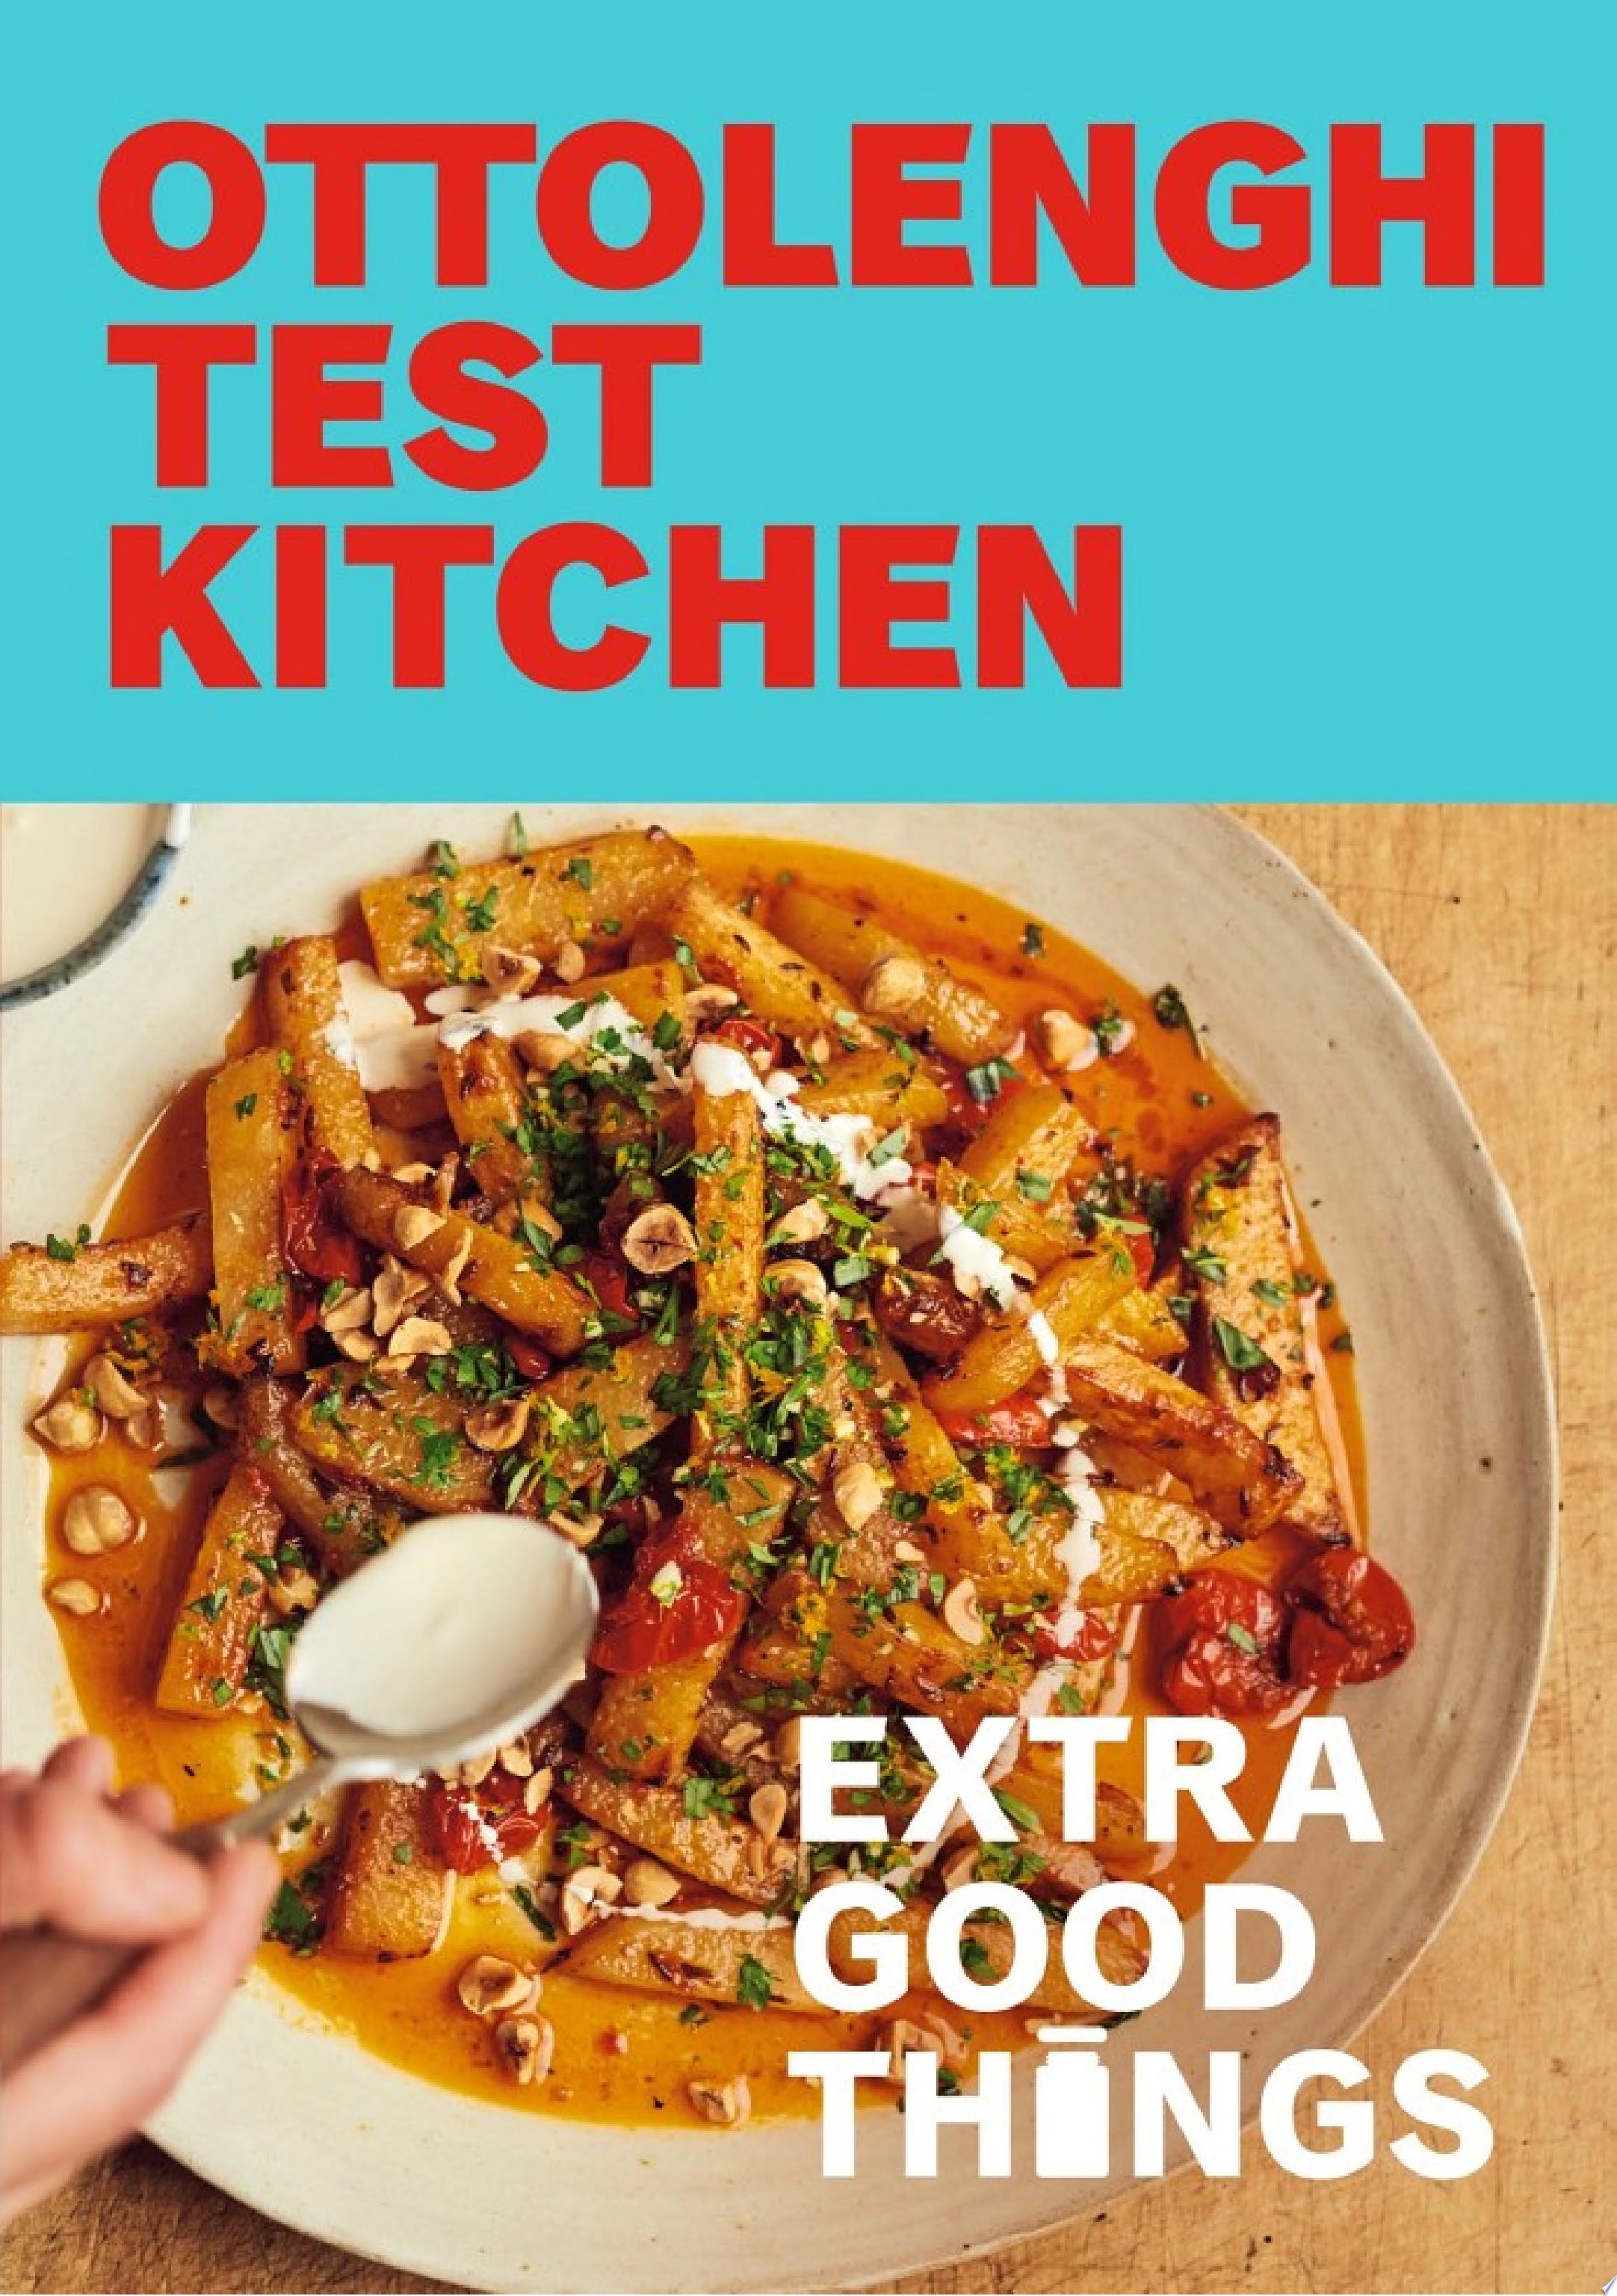 Image for "Ottolenghi Test Kitchen: Extra Good Things"